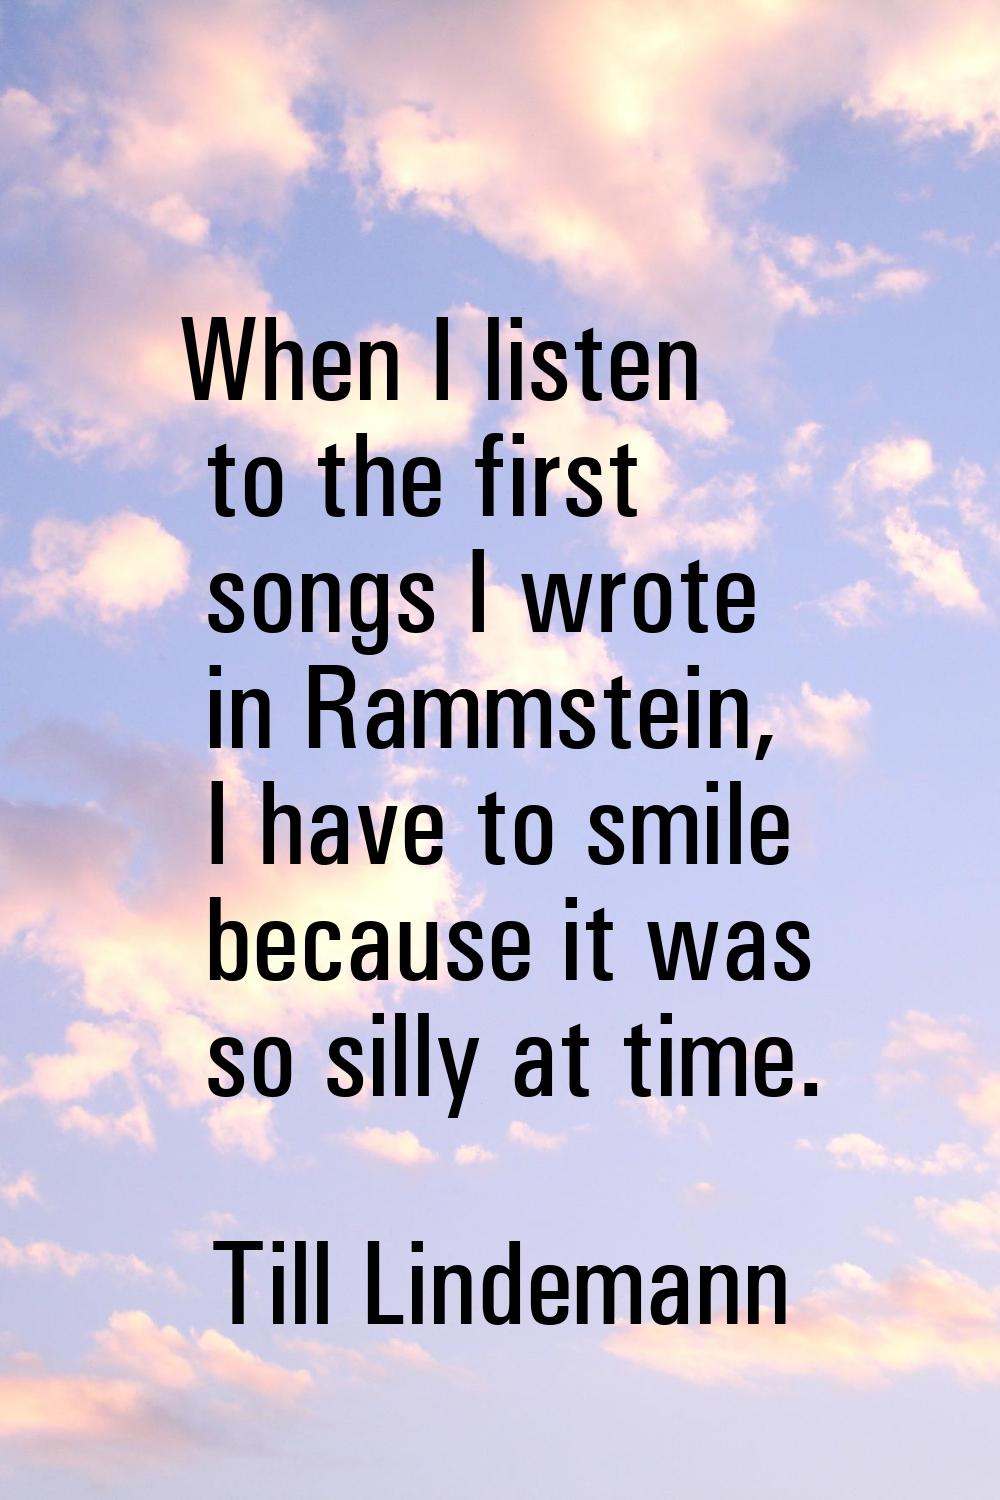 When I listen to the first songs I wrote in Rammstein, I have to smile because it was so silly at t